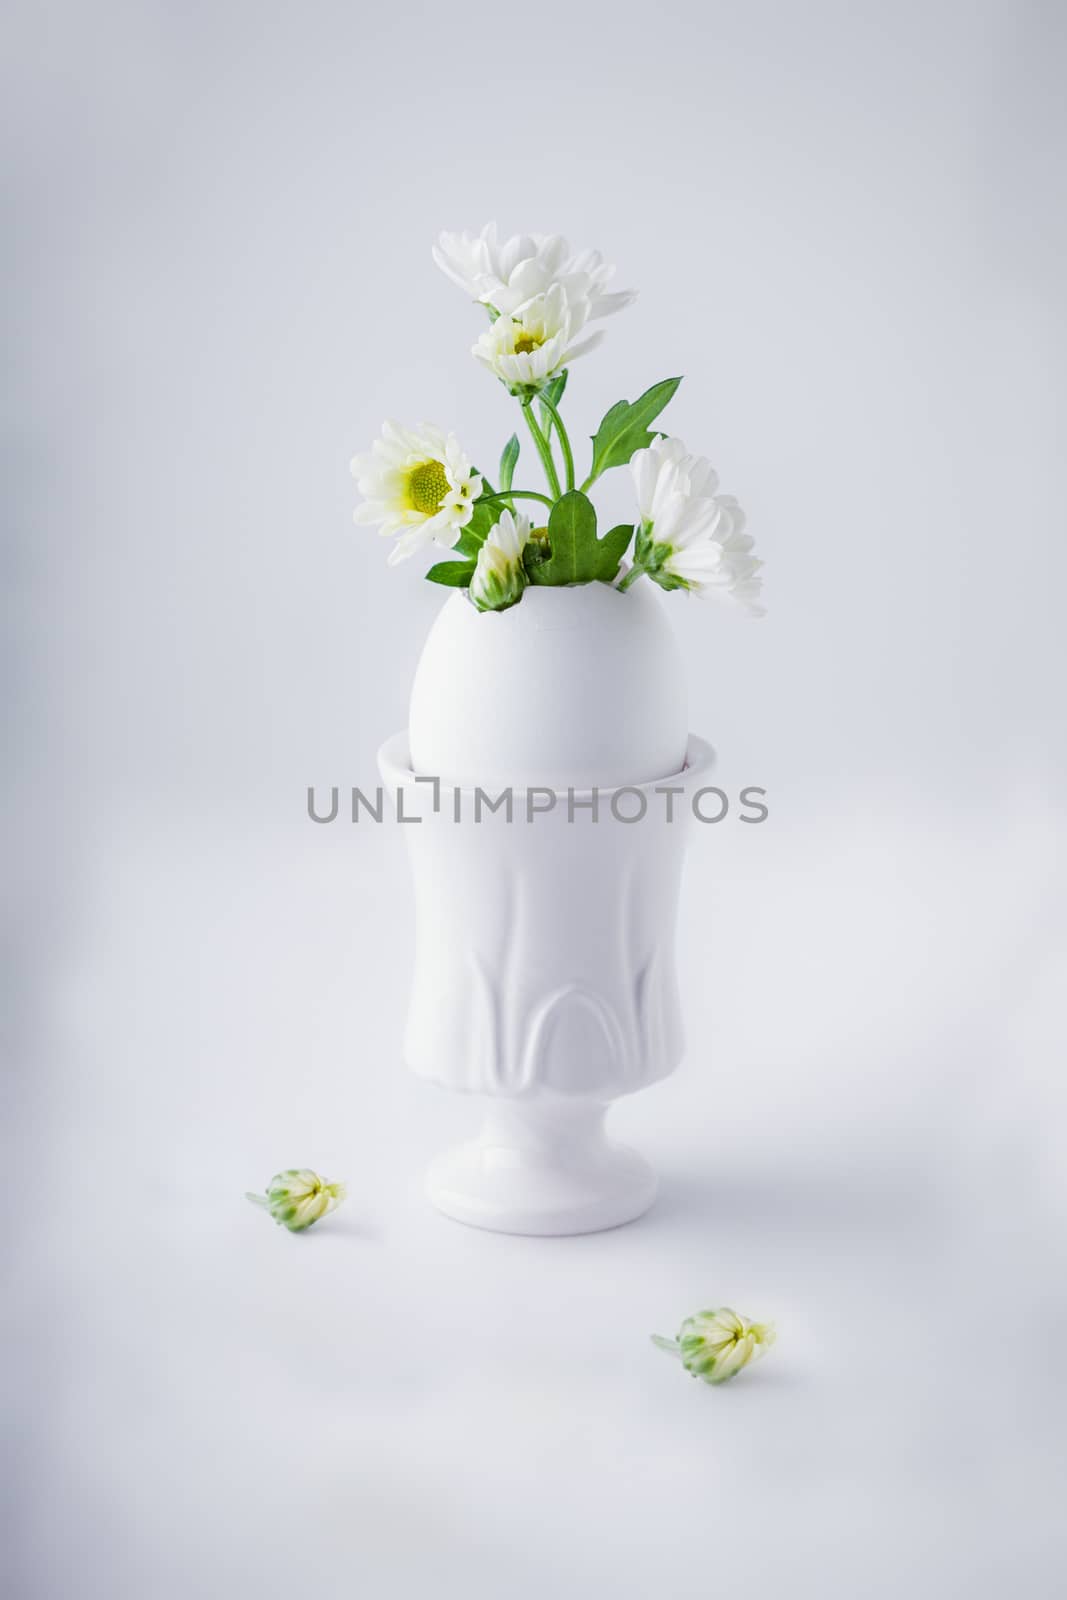 Bunch of white chrysanthemum flowers growing from egg shell.